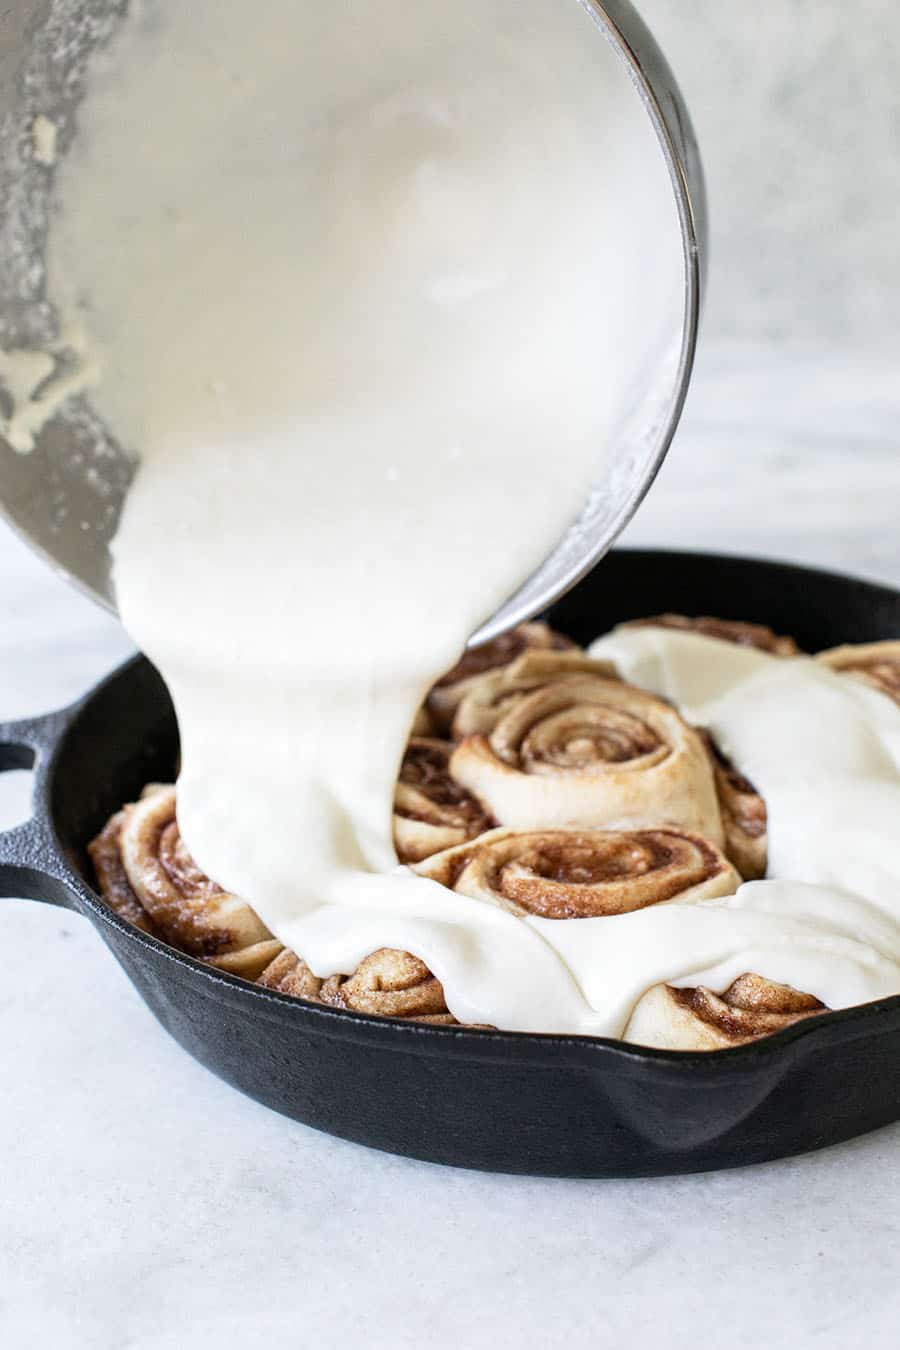 Homemade cream cheese glaze being poured over baked cinnamon rolls.